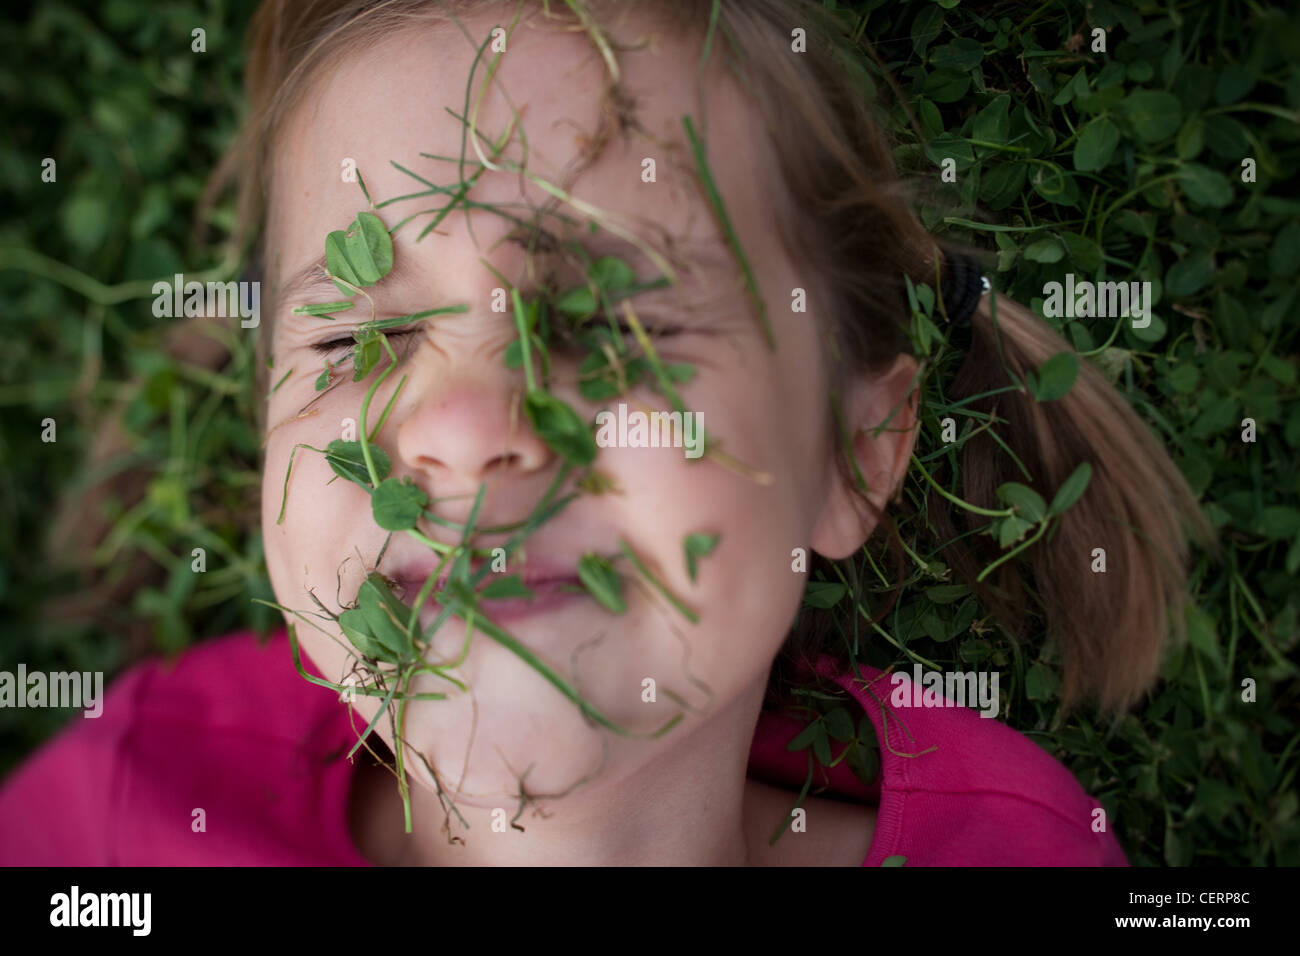 Close up of six year old girl covered in clover leaves and grass, laying on ground, summer. Stock Photo